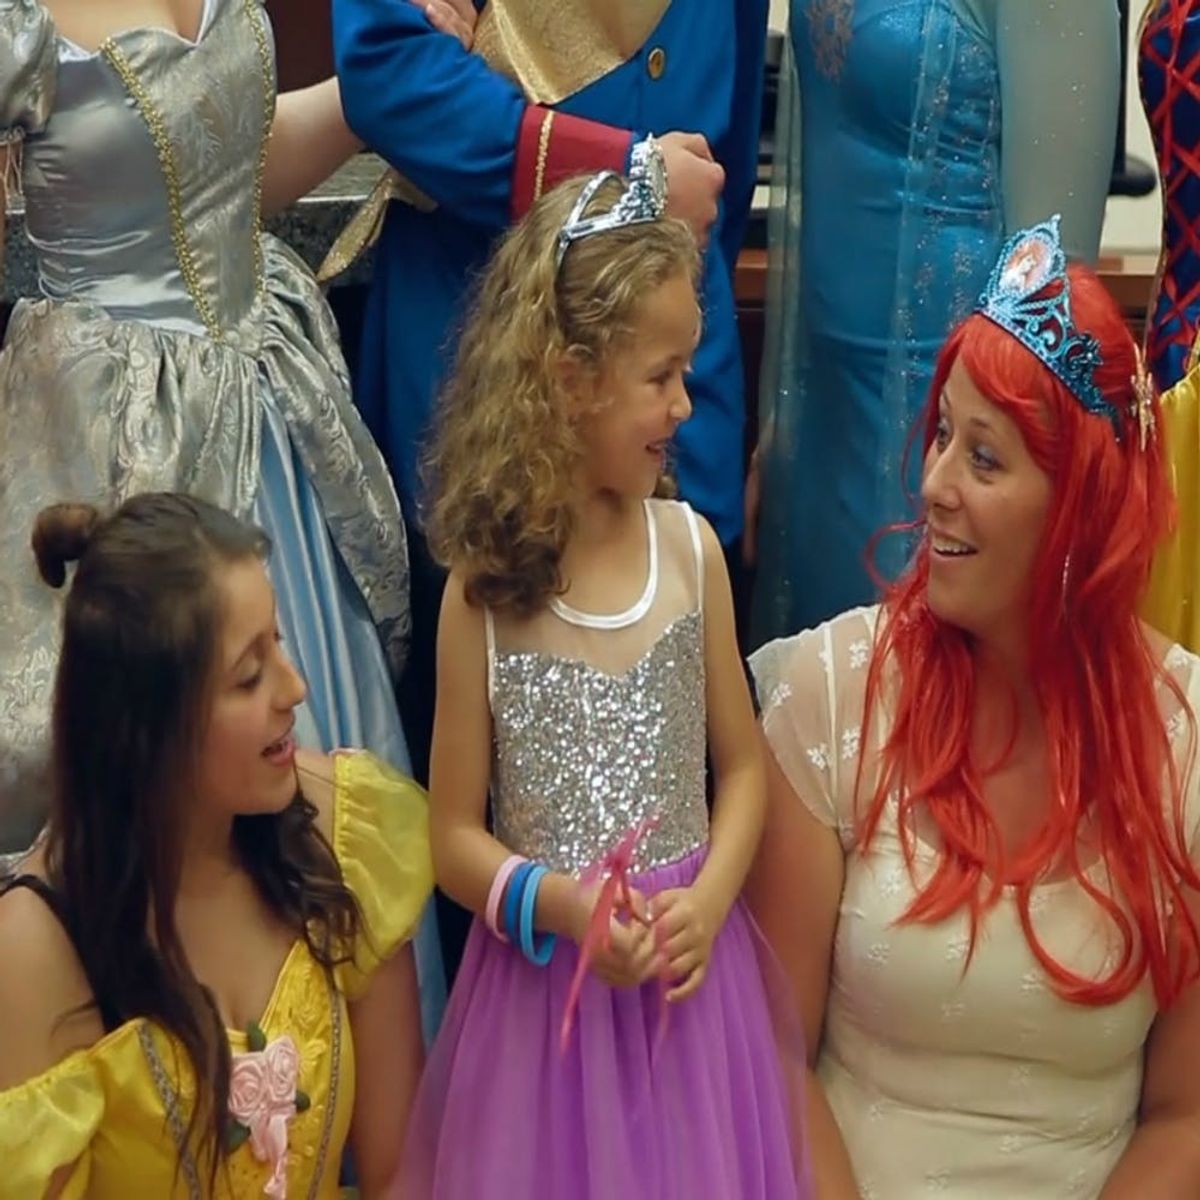 This Little Girl Had the Best Adoption Hearing Ever, Complete With Disney Princesses